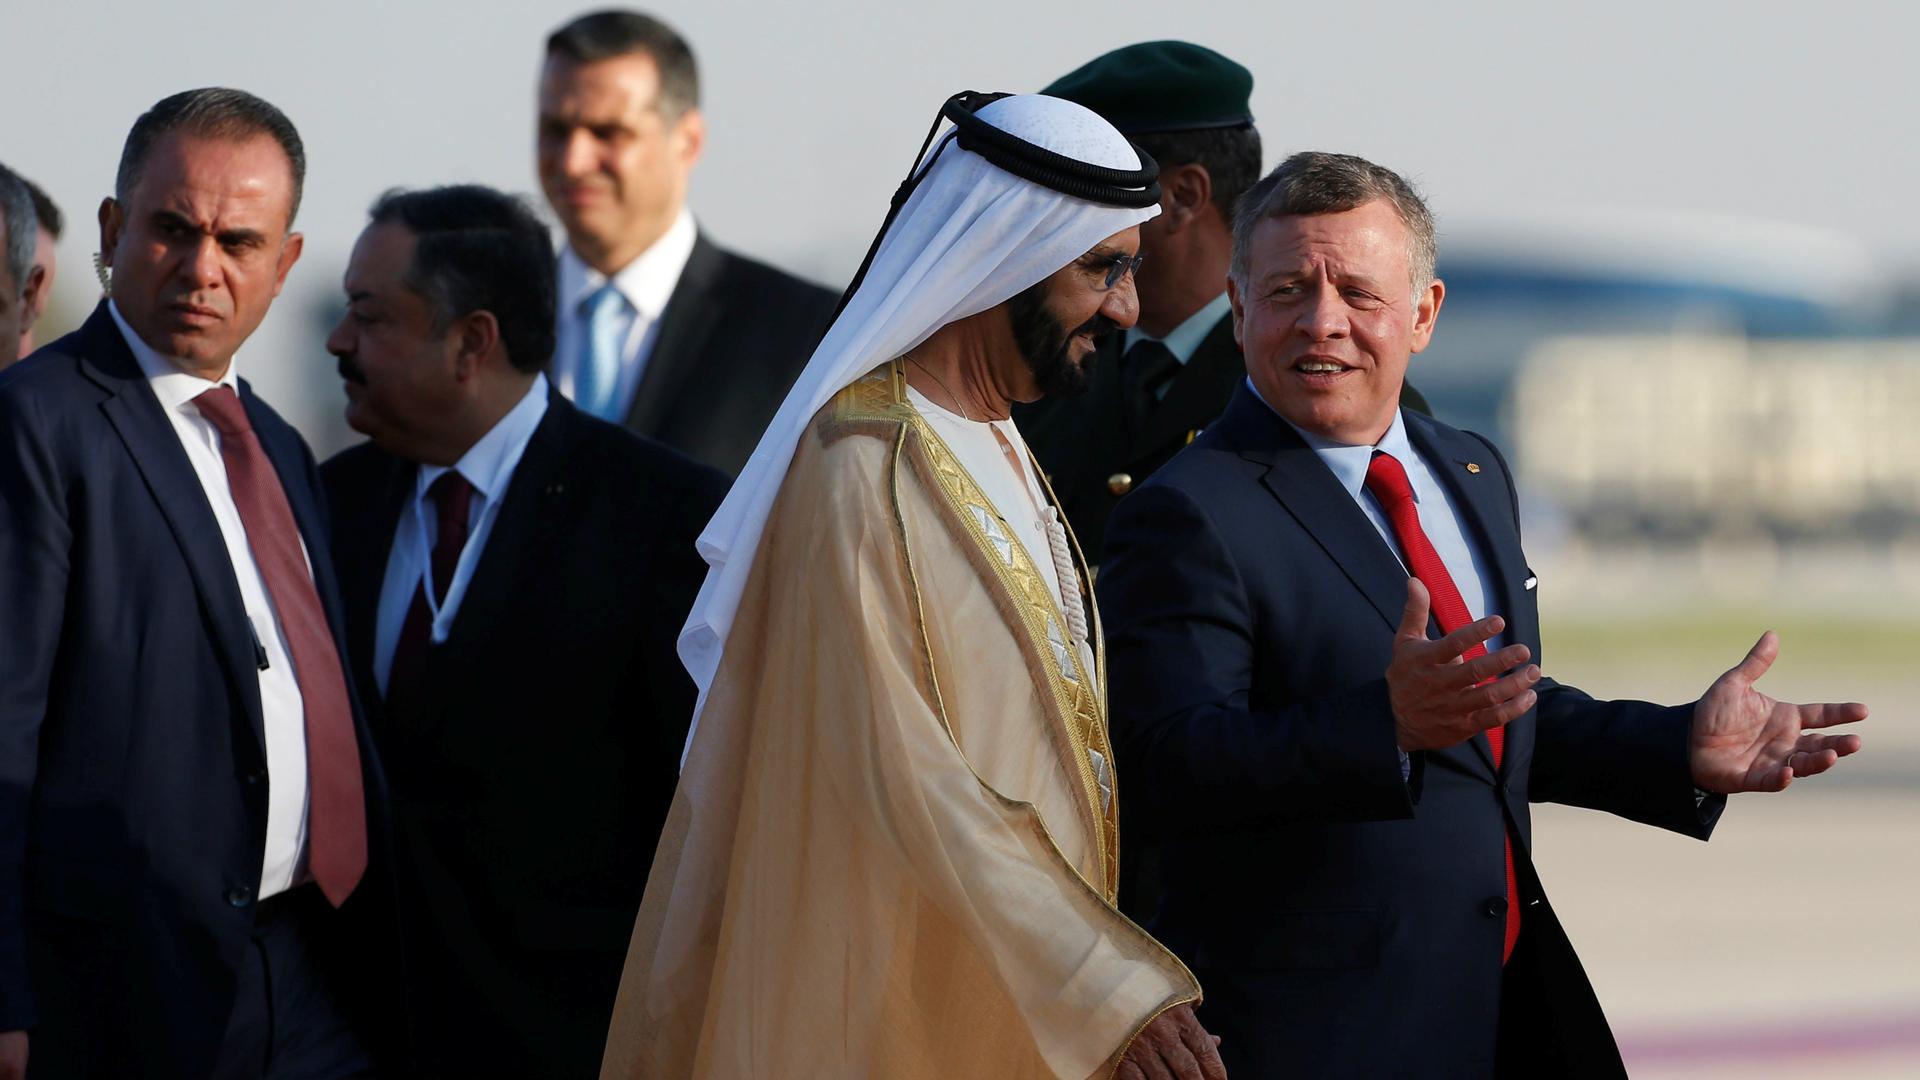 Jordan's King Abdullah II welcomes Prime Minister and Vice-President of the United Arab Emirates and ruler of Dubai Sheikh Mohammed bin Rashid al-Maktoum during a reception ceremony at the Queen Alia International Airport in Amman, Jordan, March 28, 2017.